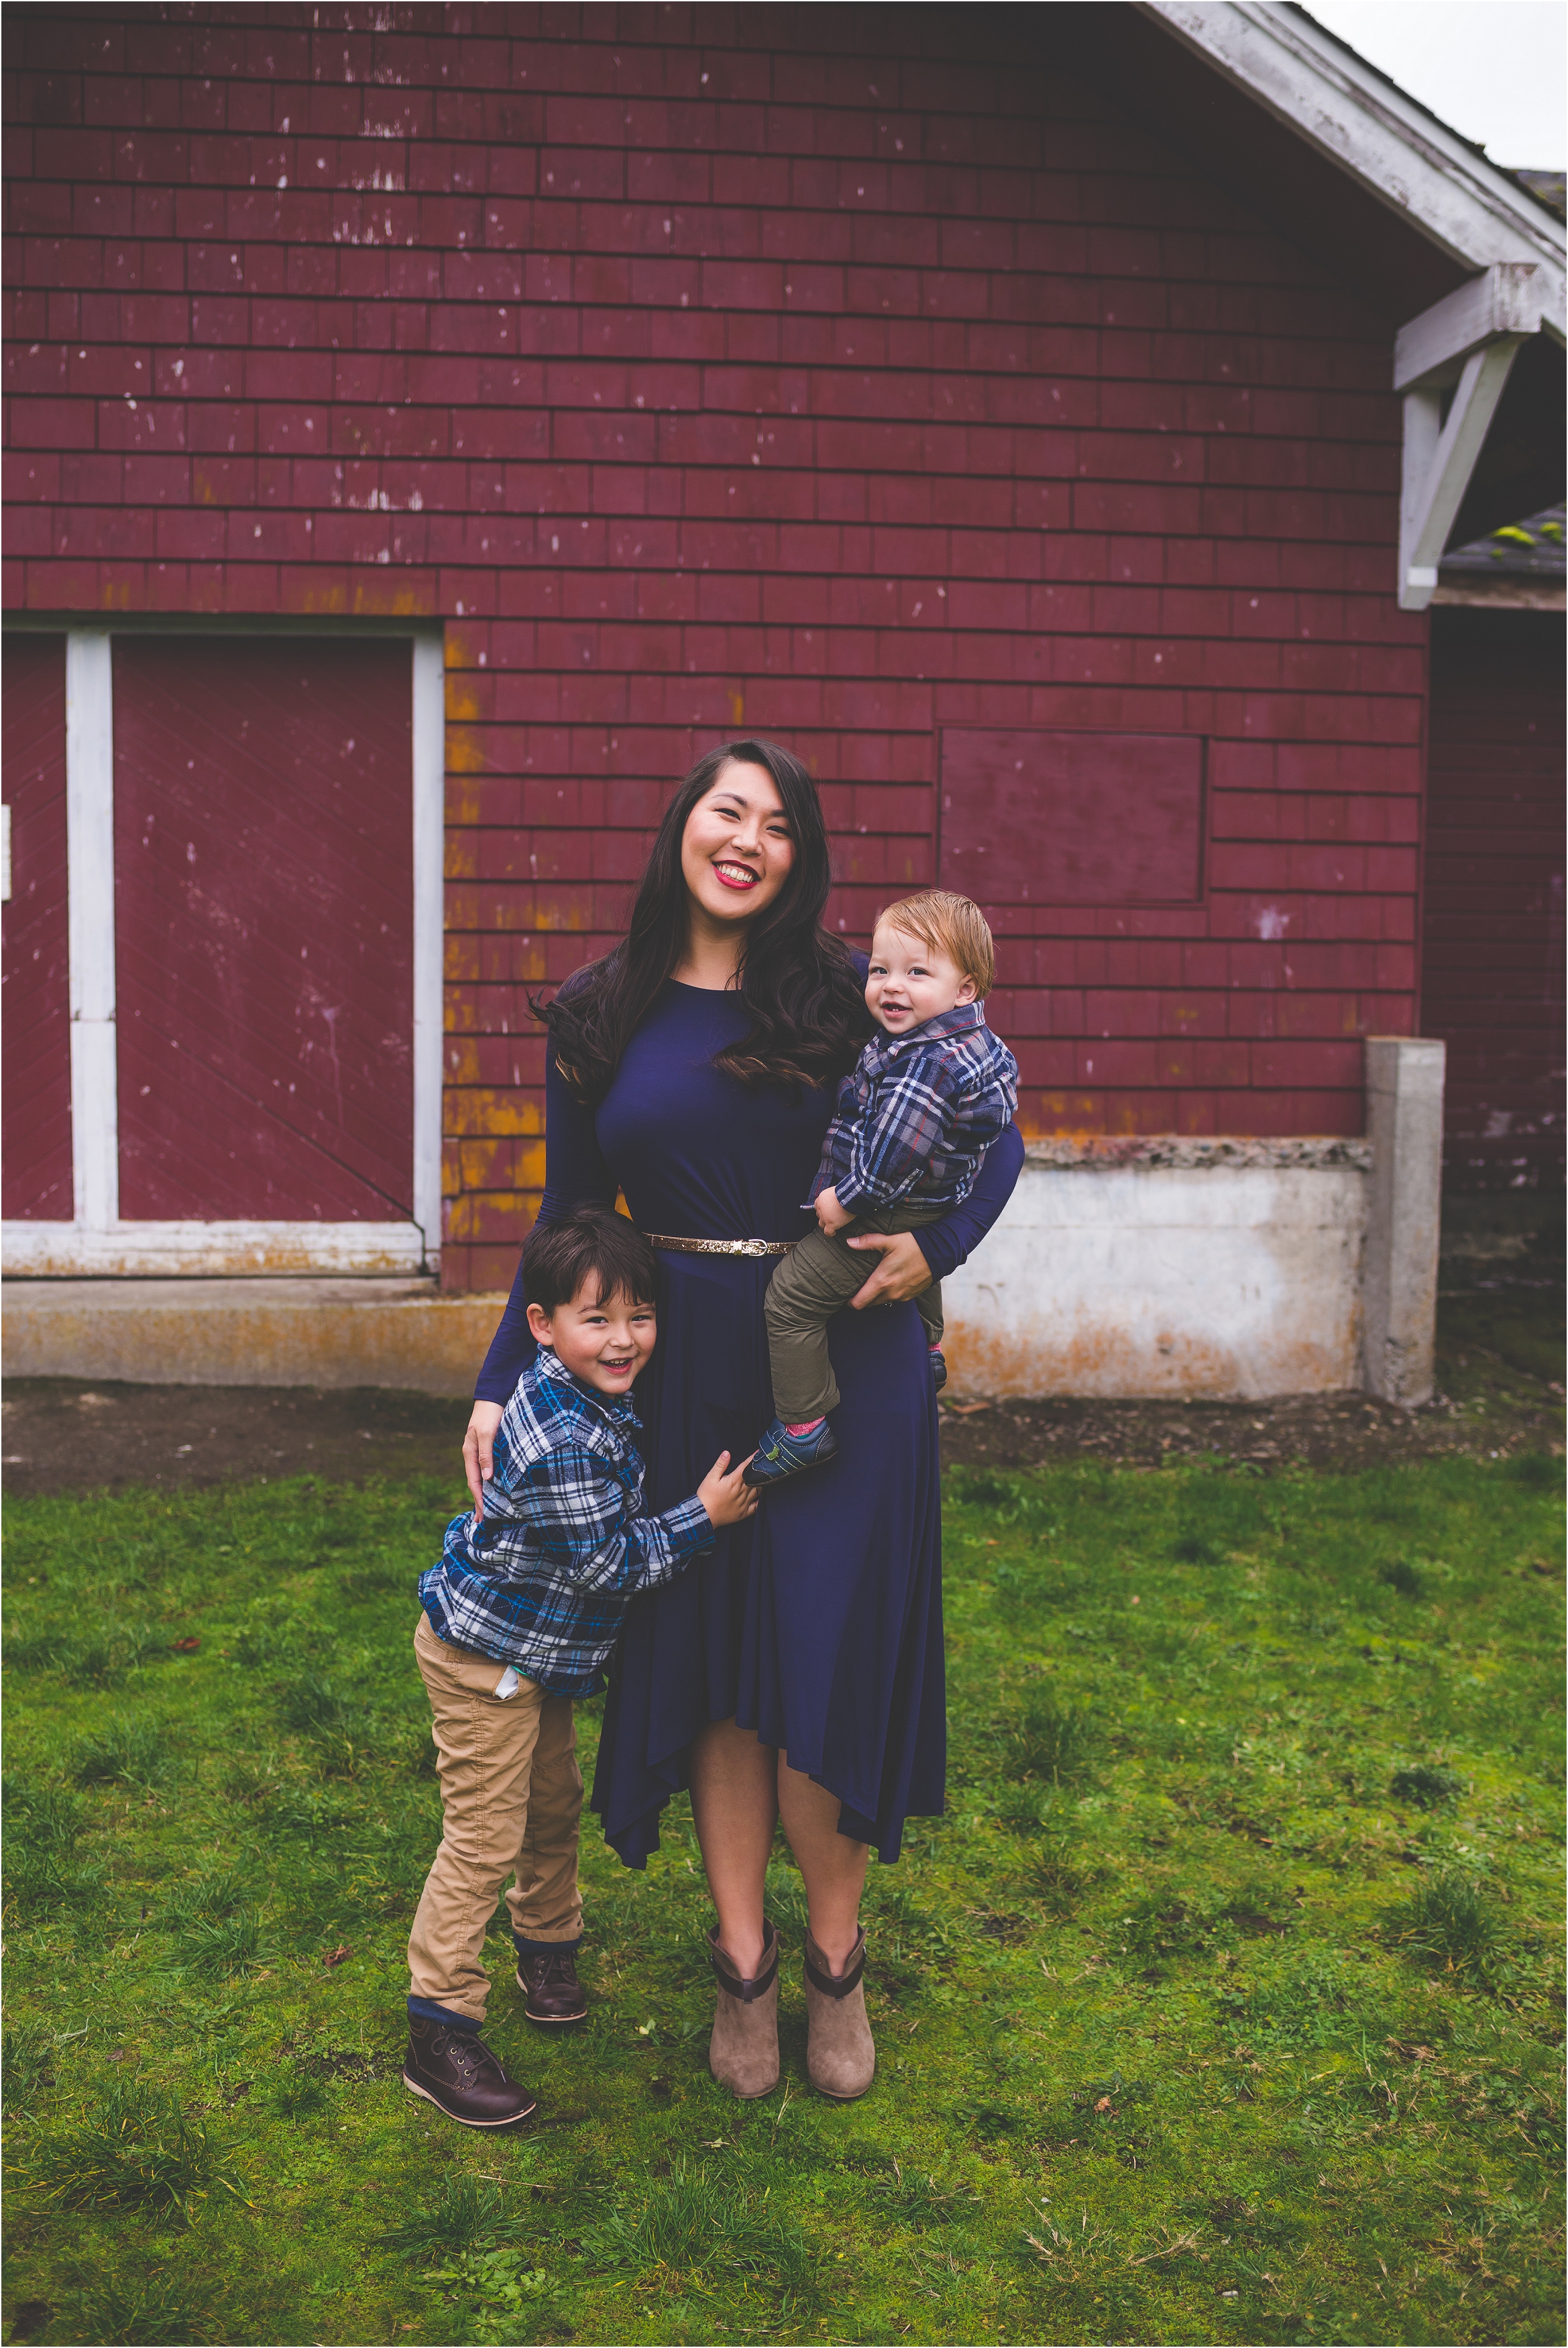 fort-steilacoom-park-family-session-jannicka-mayte-pacific-northwest-lifestyle-photographer_0012.jpg